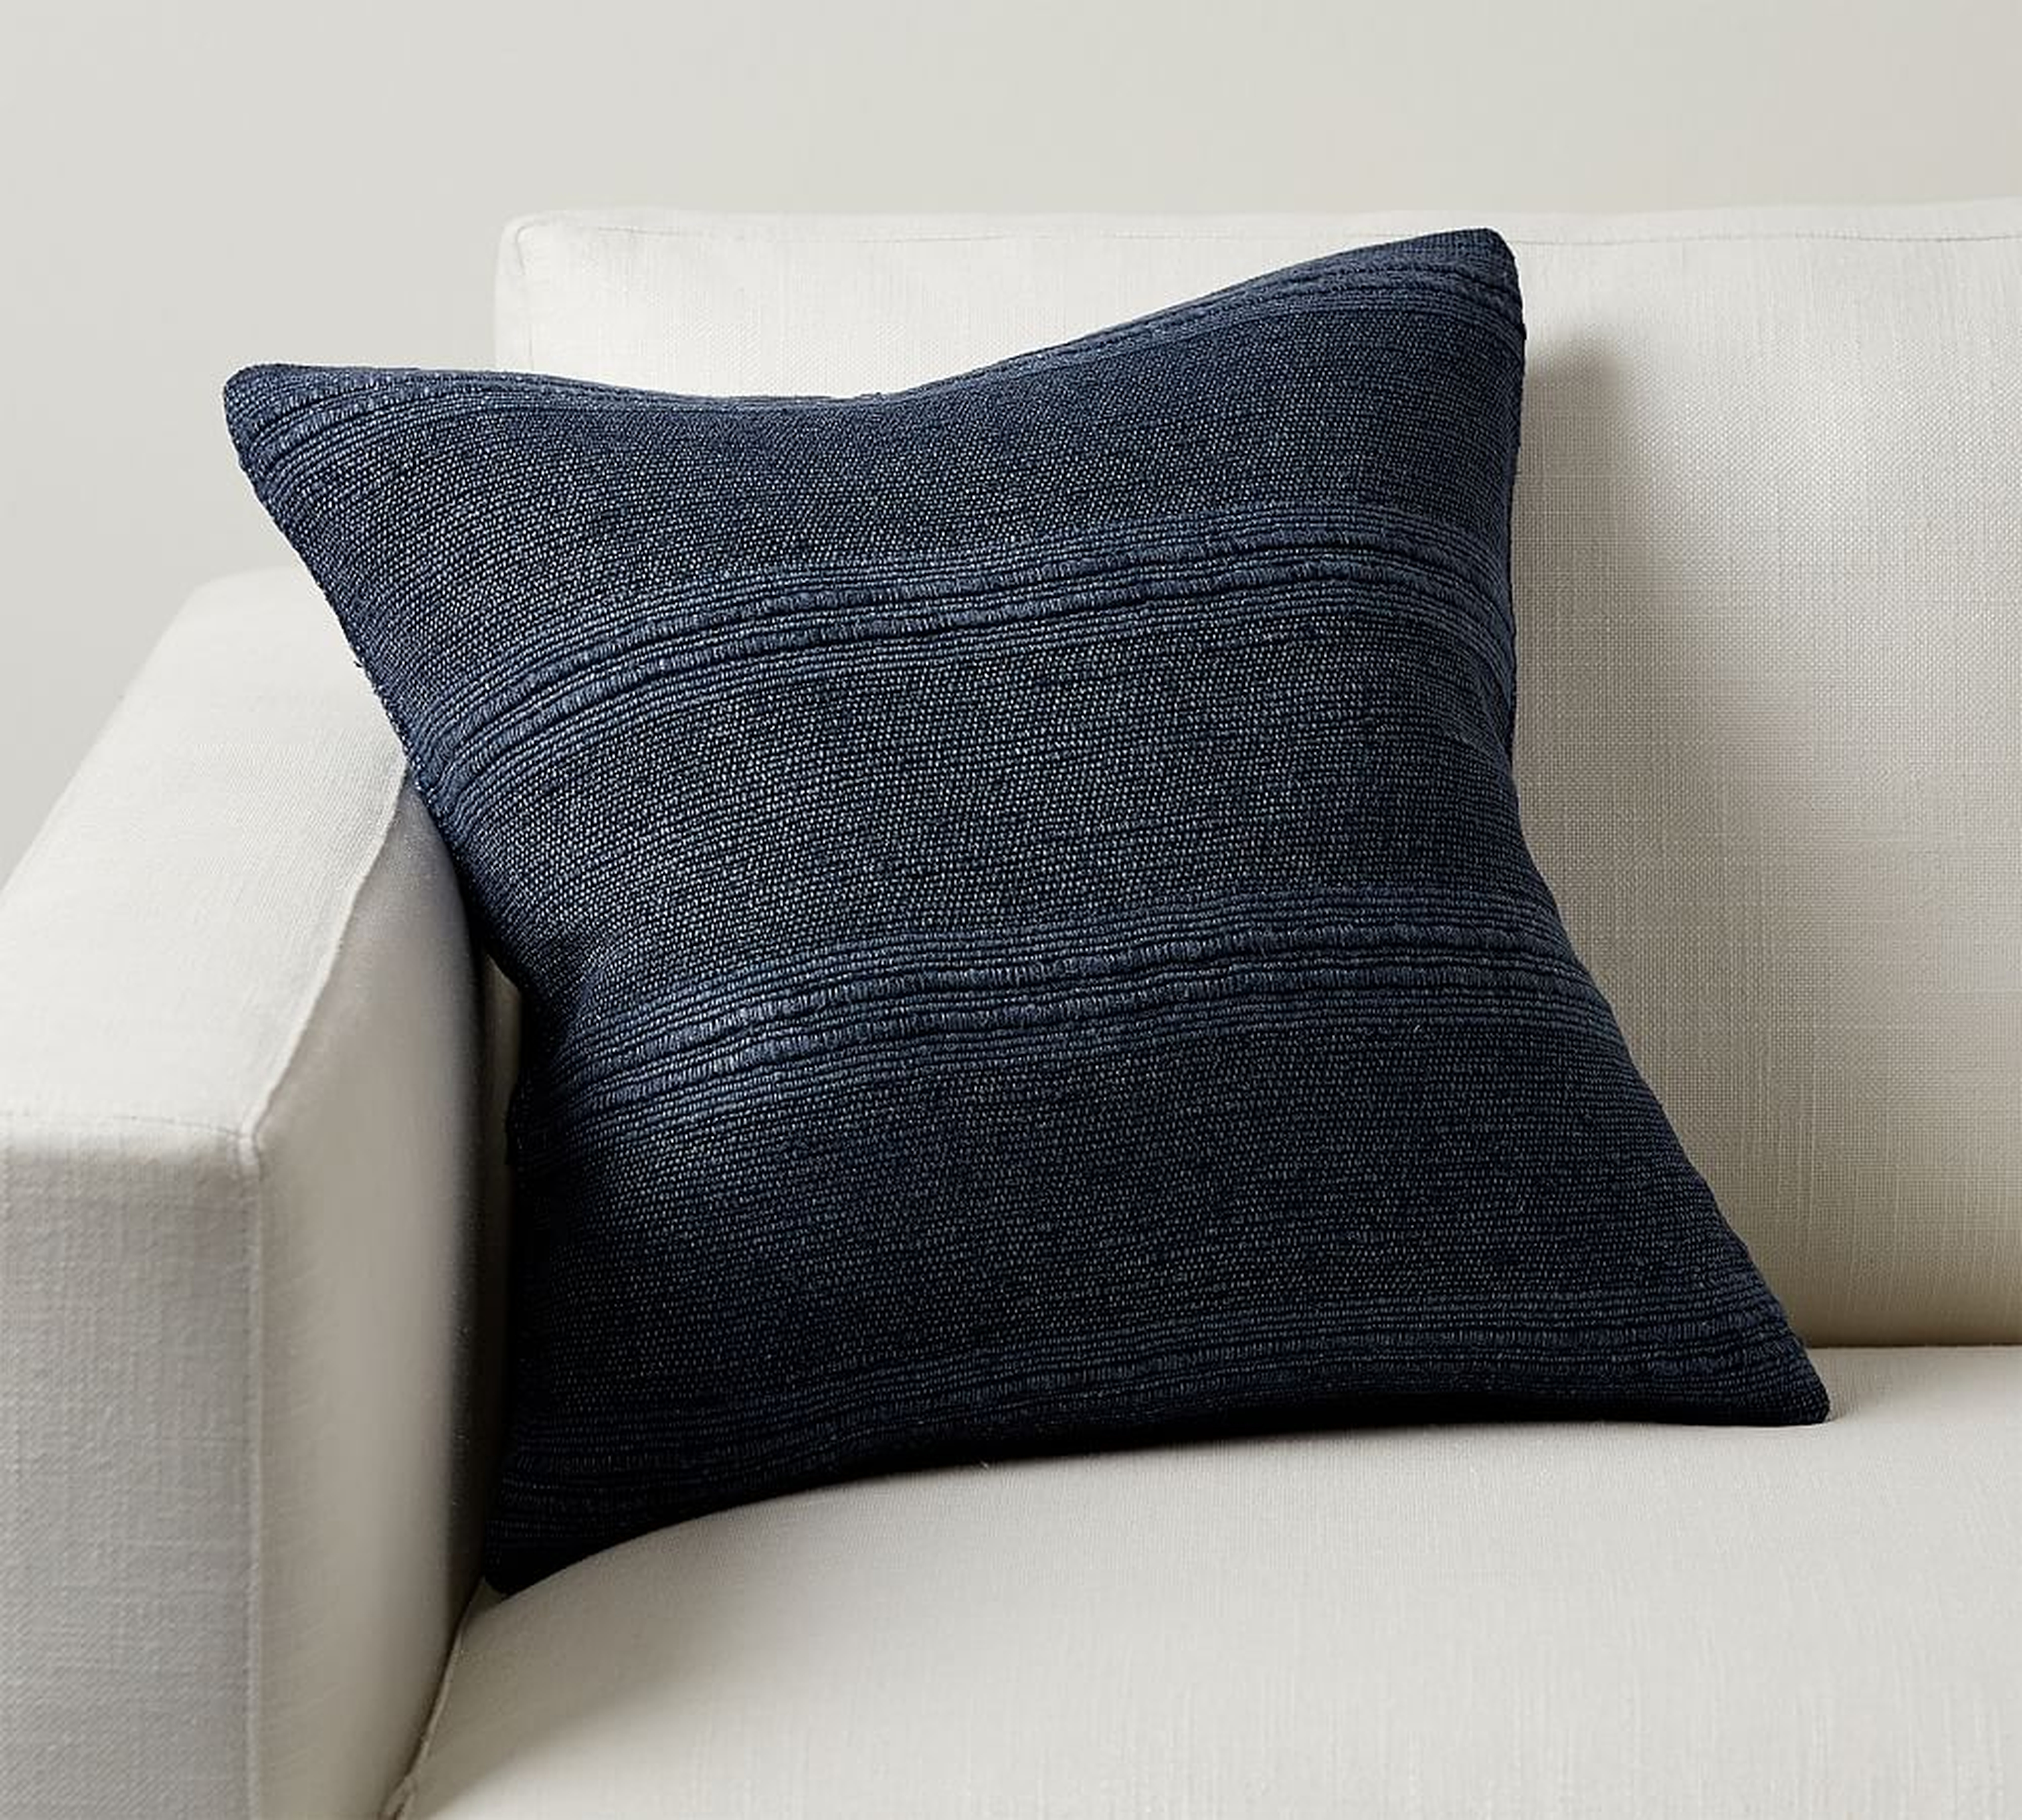 Relaxed Striped Pillow Cover, 18" x 18", Indigo - Pottery Barn